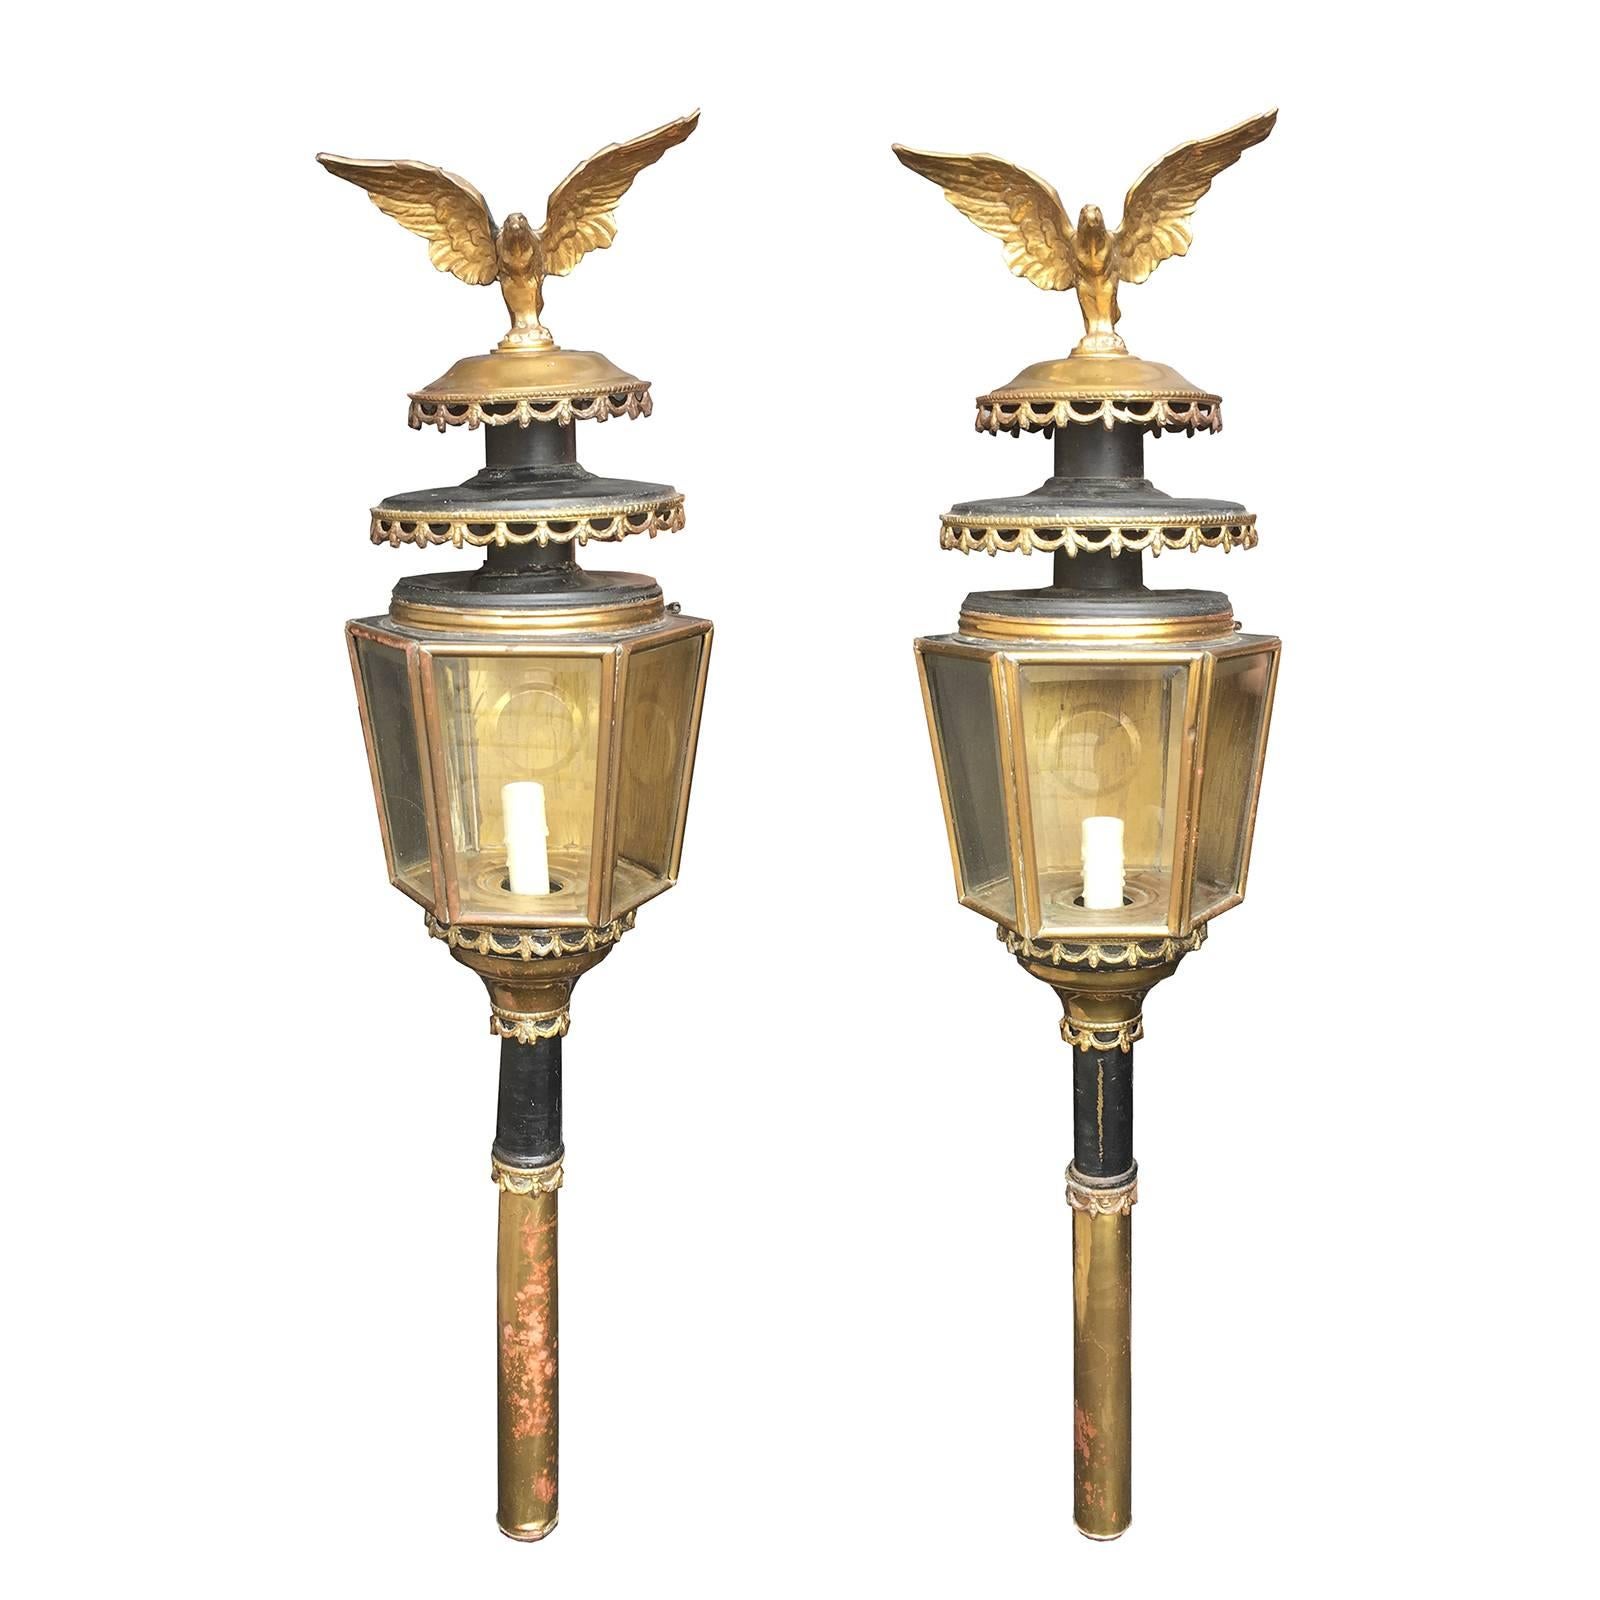 Pair of 19th Century Large Brass Coach Lanterns with Eagle